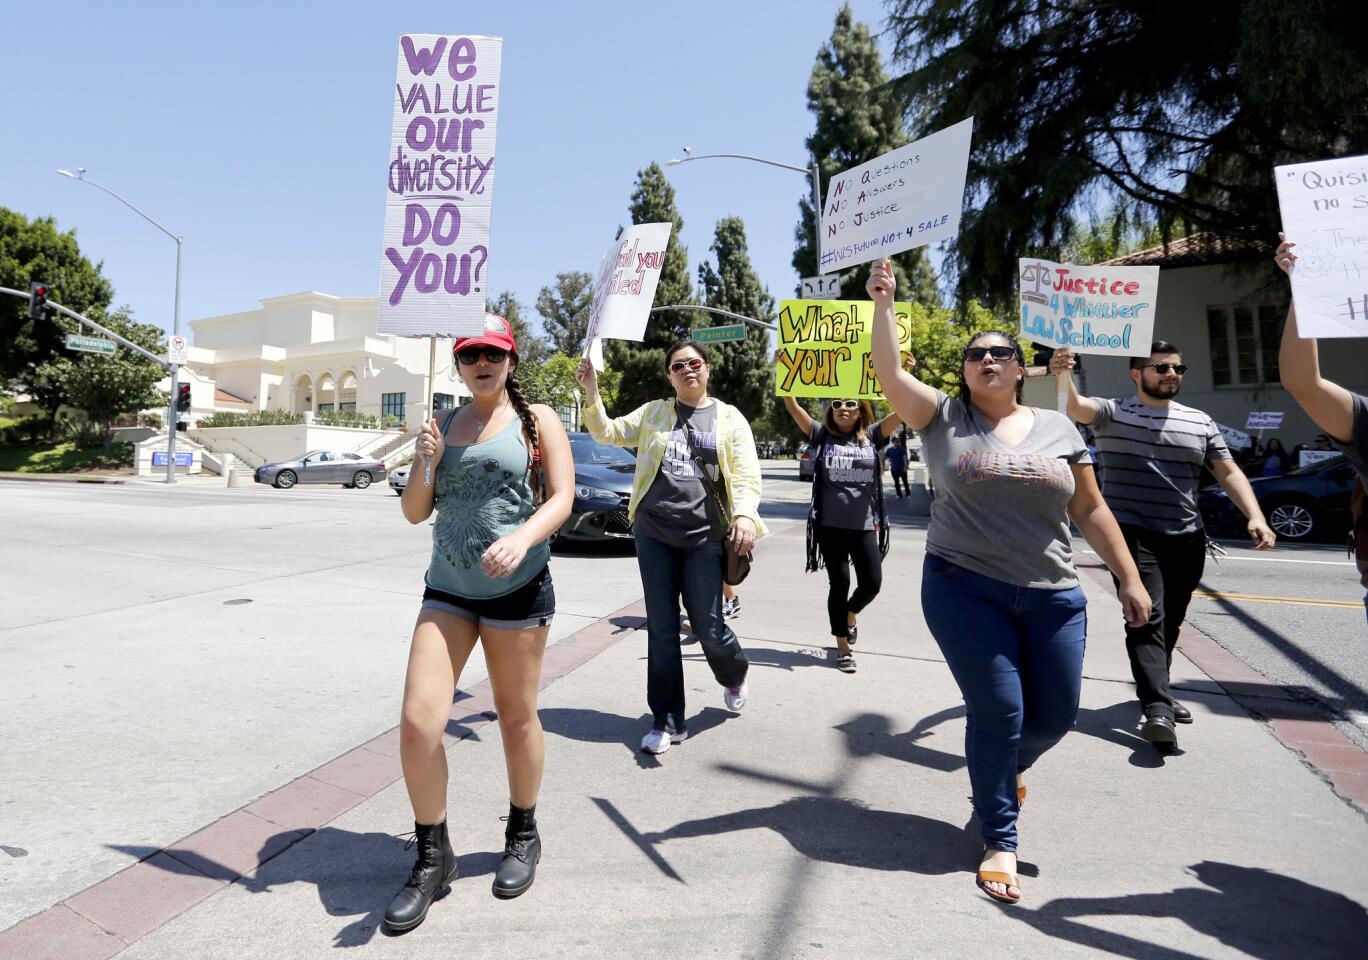 Photo Gallery: Whittier Law School students protest the closing of the Costa Mesa campus